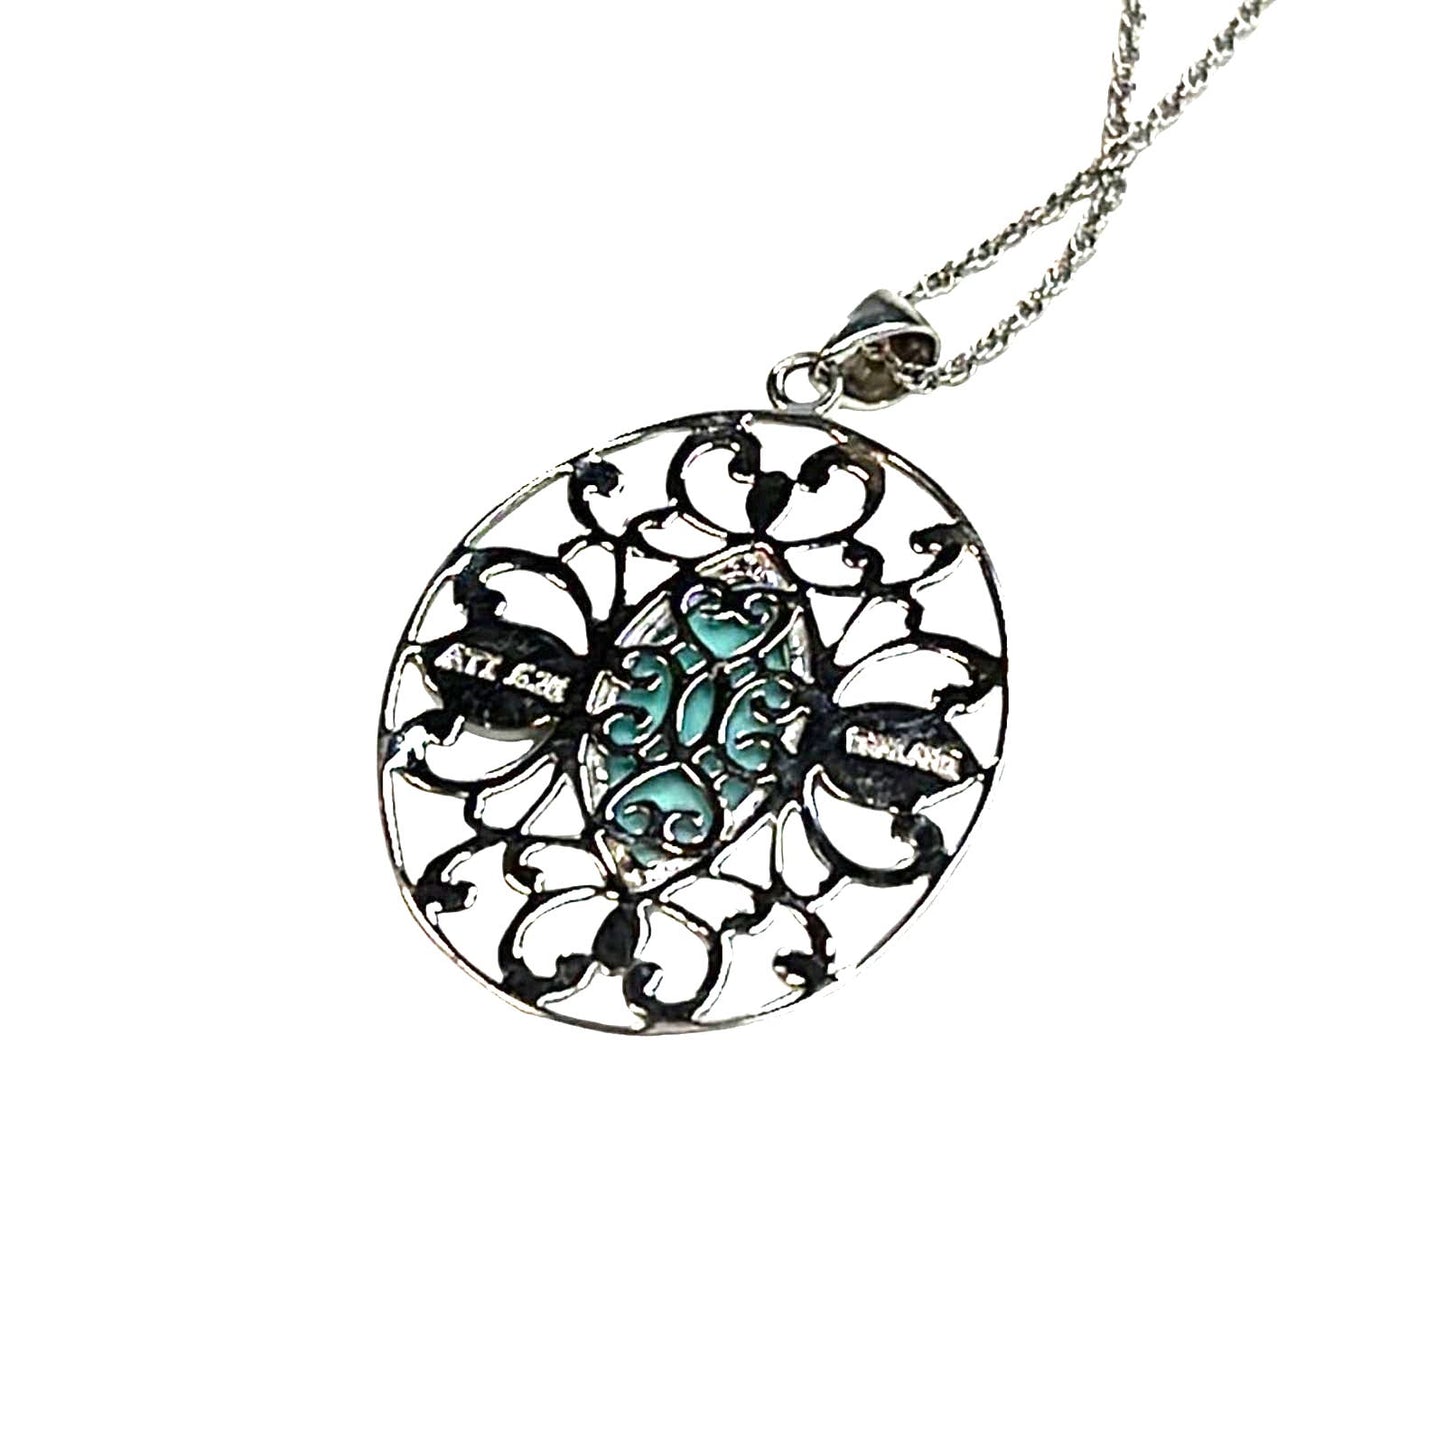 R. H. Macy Silver, Turquoise & Lapis Filigree Necklace, NWT!